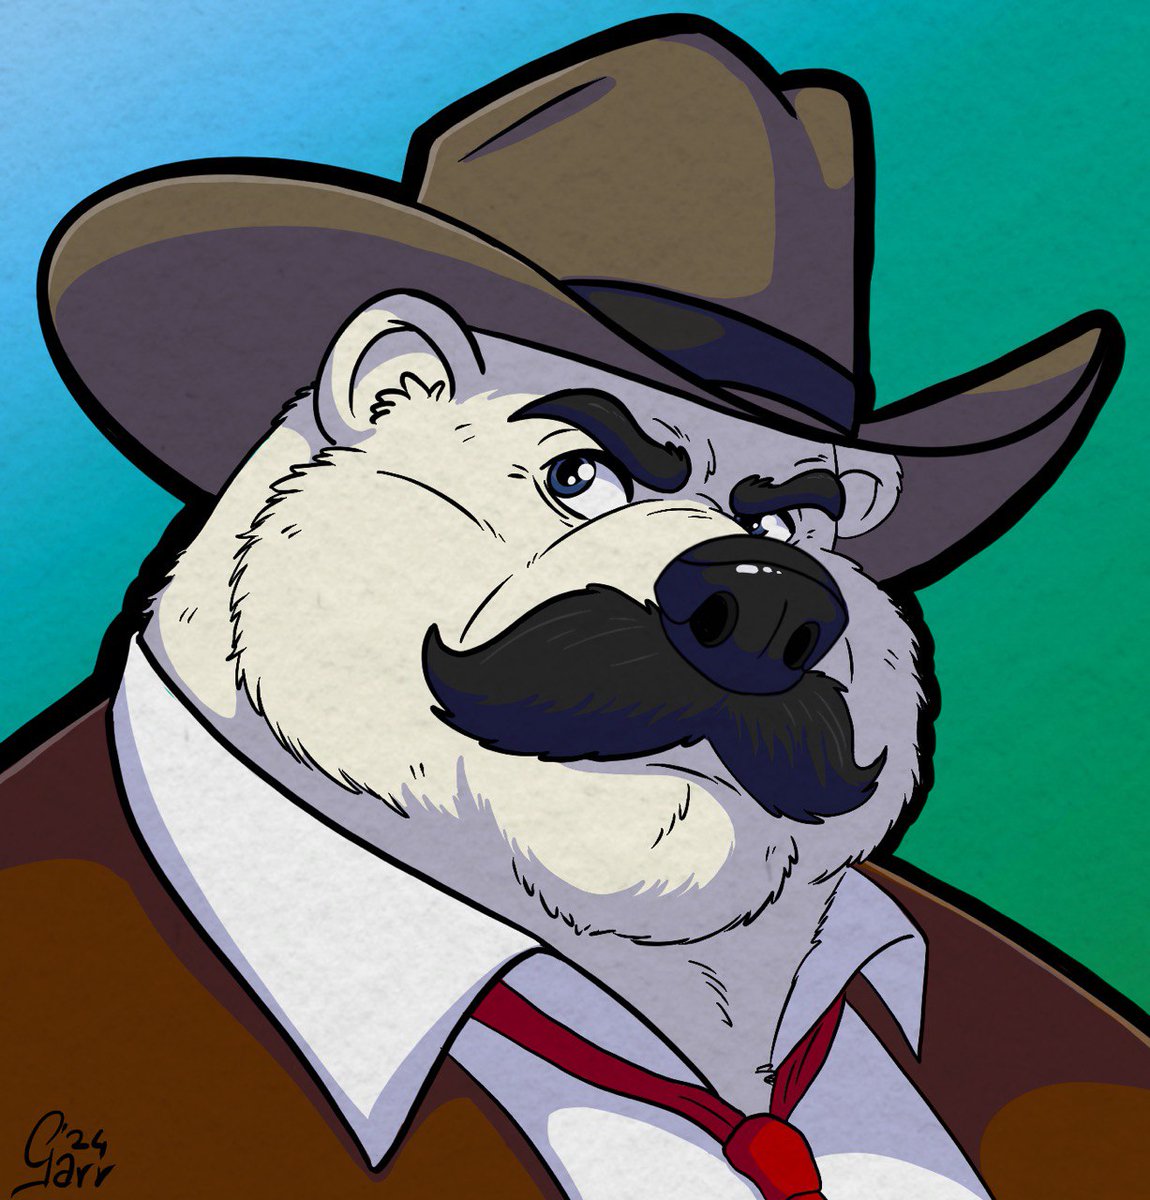 Meet Donald Quinn. Private Detective, ex-military, ex-Mountie and handsome to boot! Incredible artwork I commissioned from @Garrodor